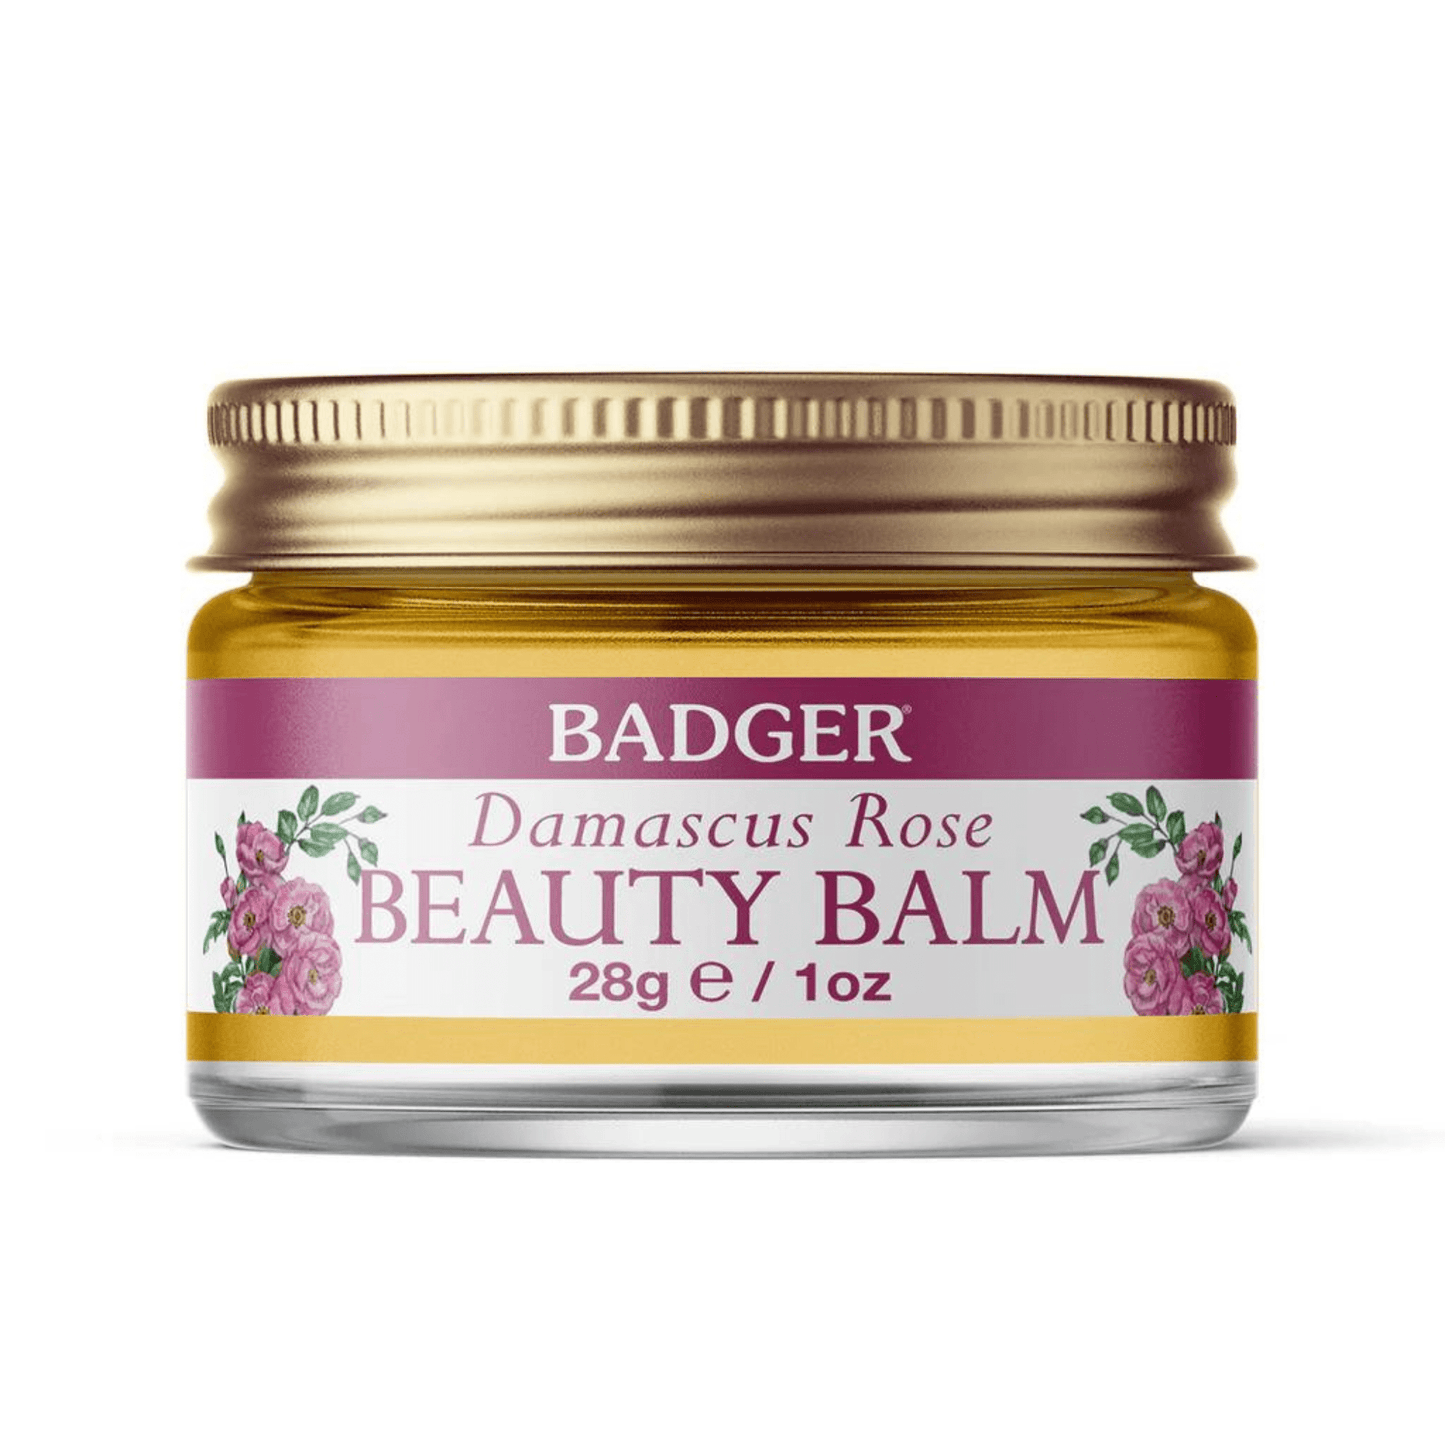 Primary Image of Damascus Rose Beauty Balm